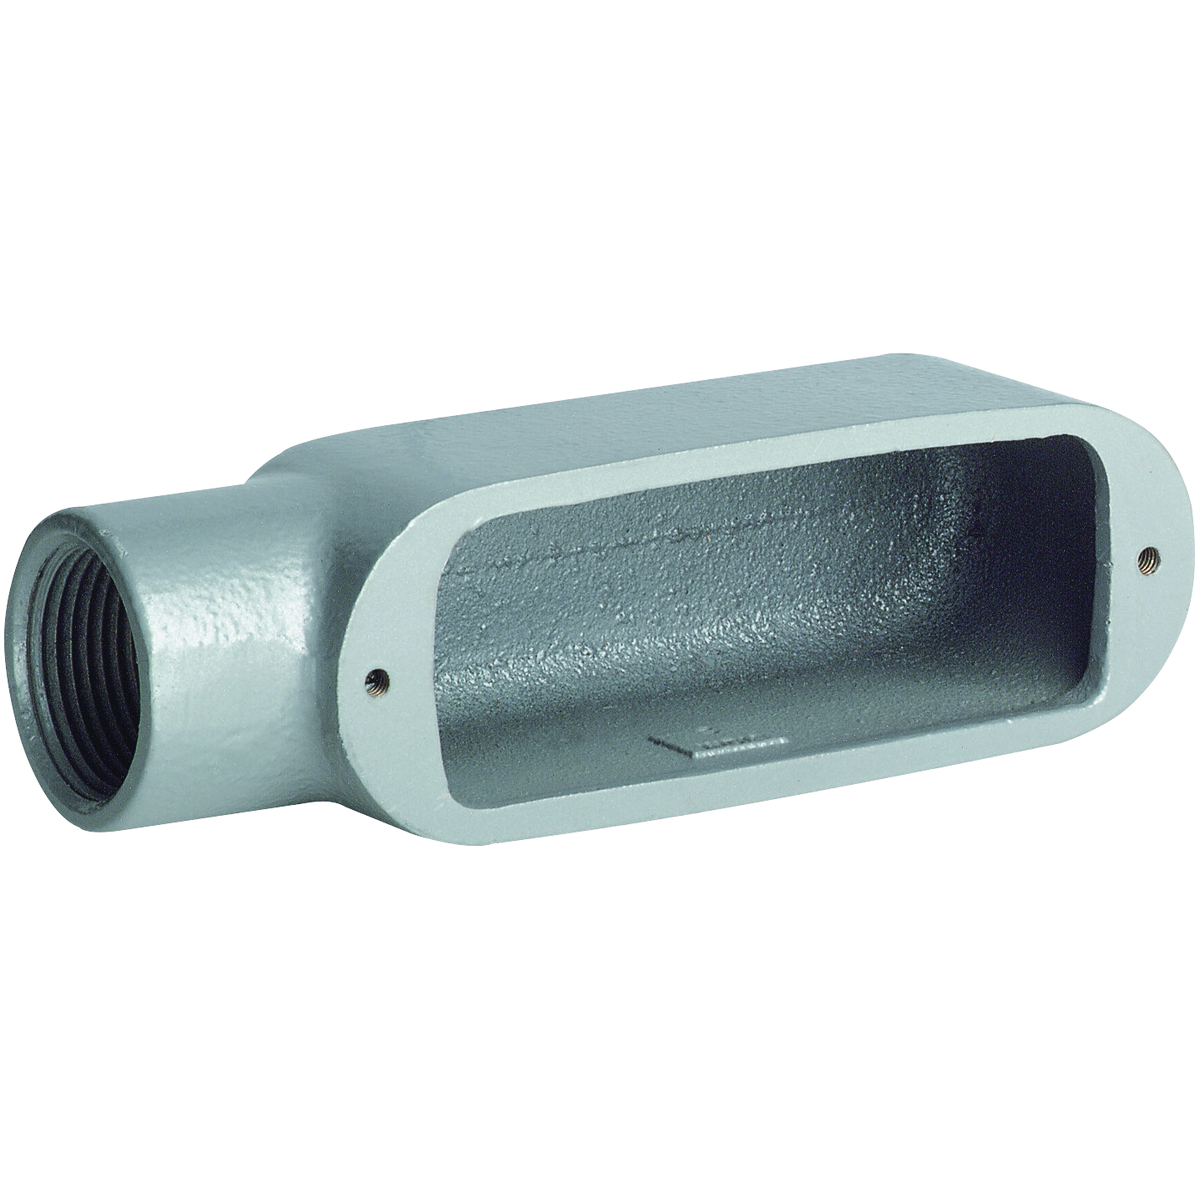 O SERIES/DURALOY 5 SERIES - ALUMINUM CONDUIT BODY - E TYPE - HUB SIZE3/4 INCH - VOLUME 7.0 CUBIC INCHES